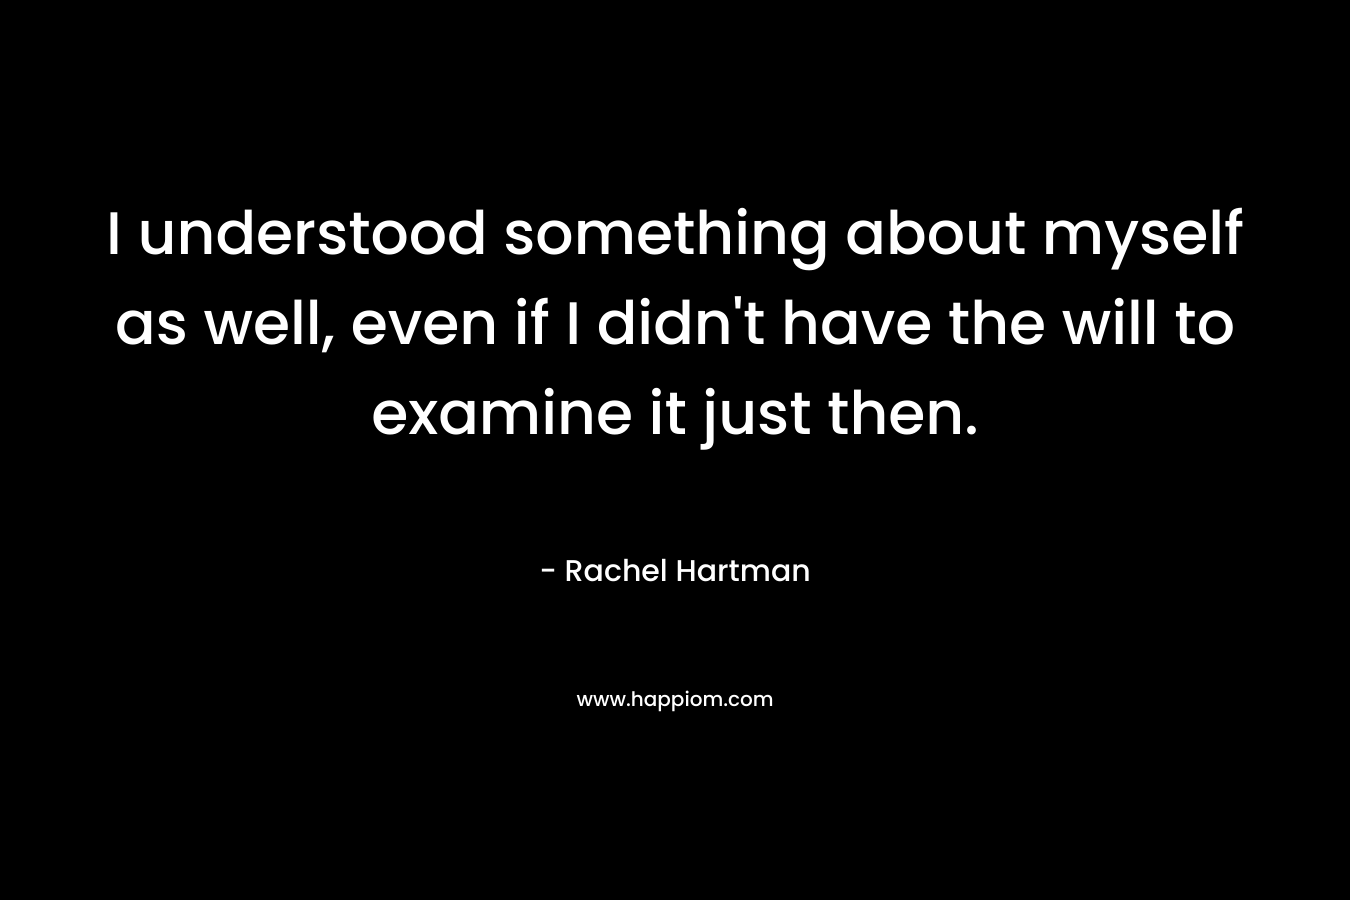 I understood something about myself as well, even if I didn’t have the will to examine it just then. – Rachel Hartman